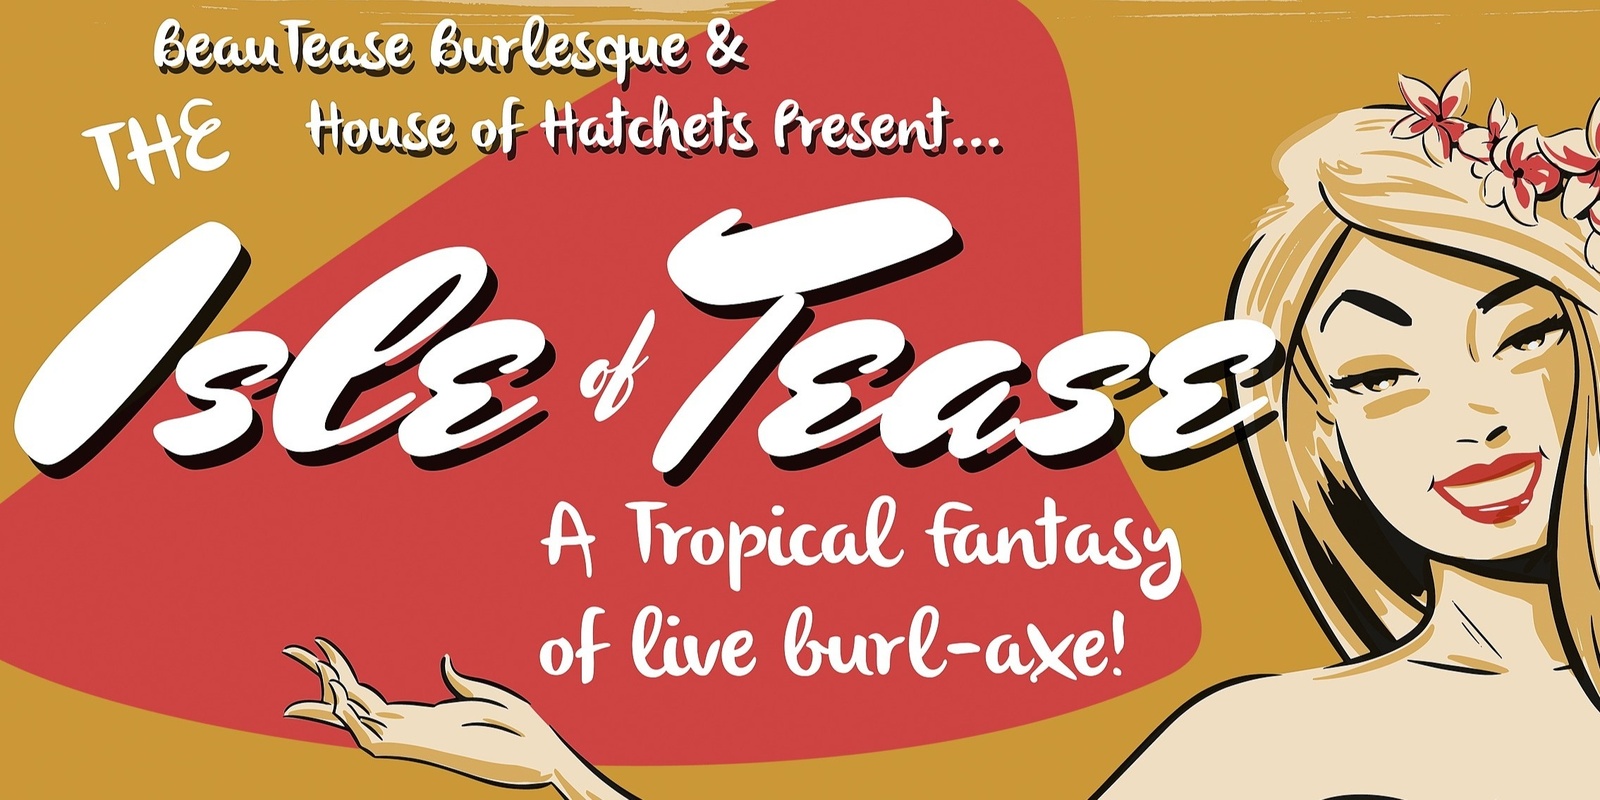 Banner image for Isle of Tease